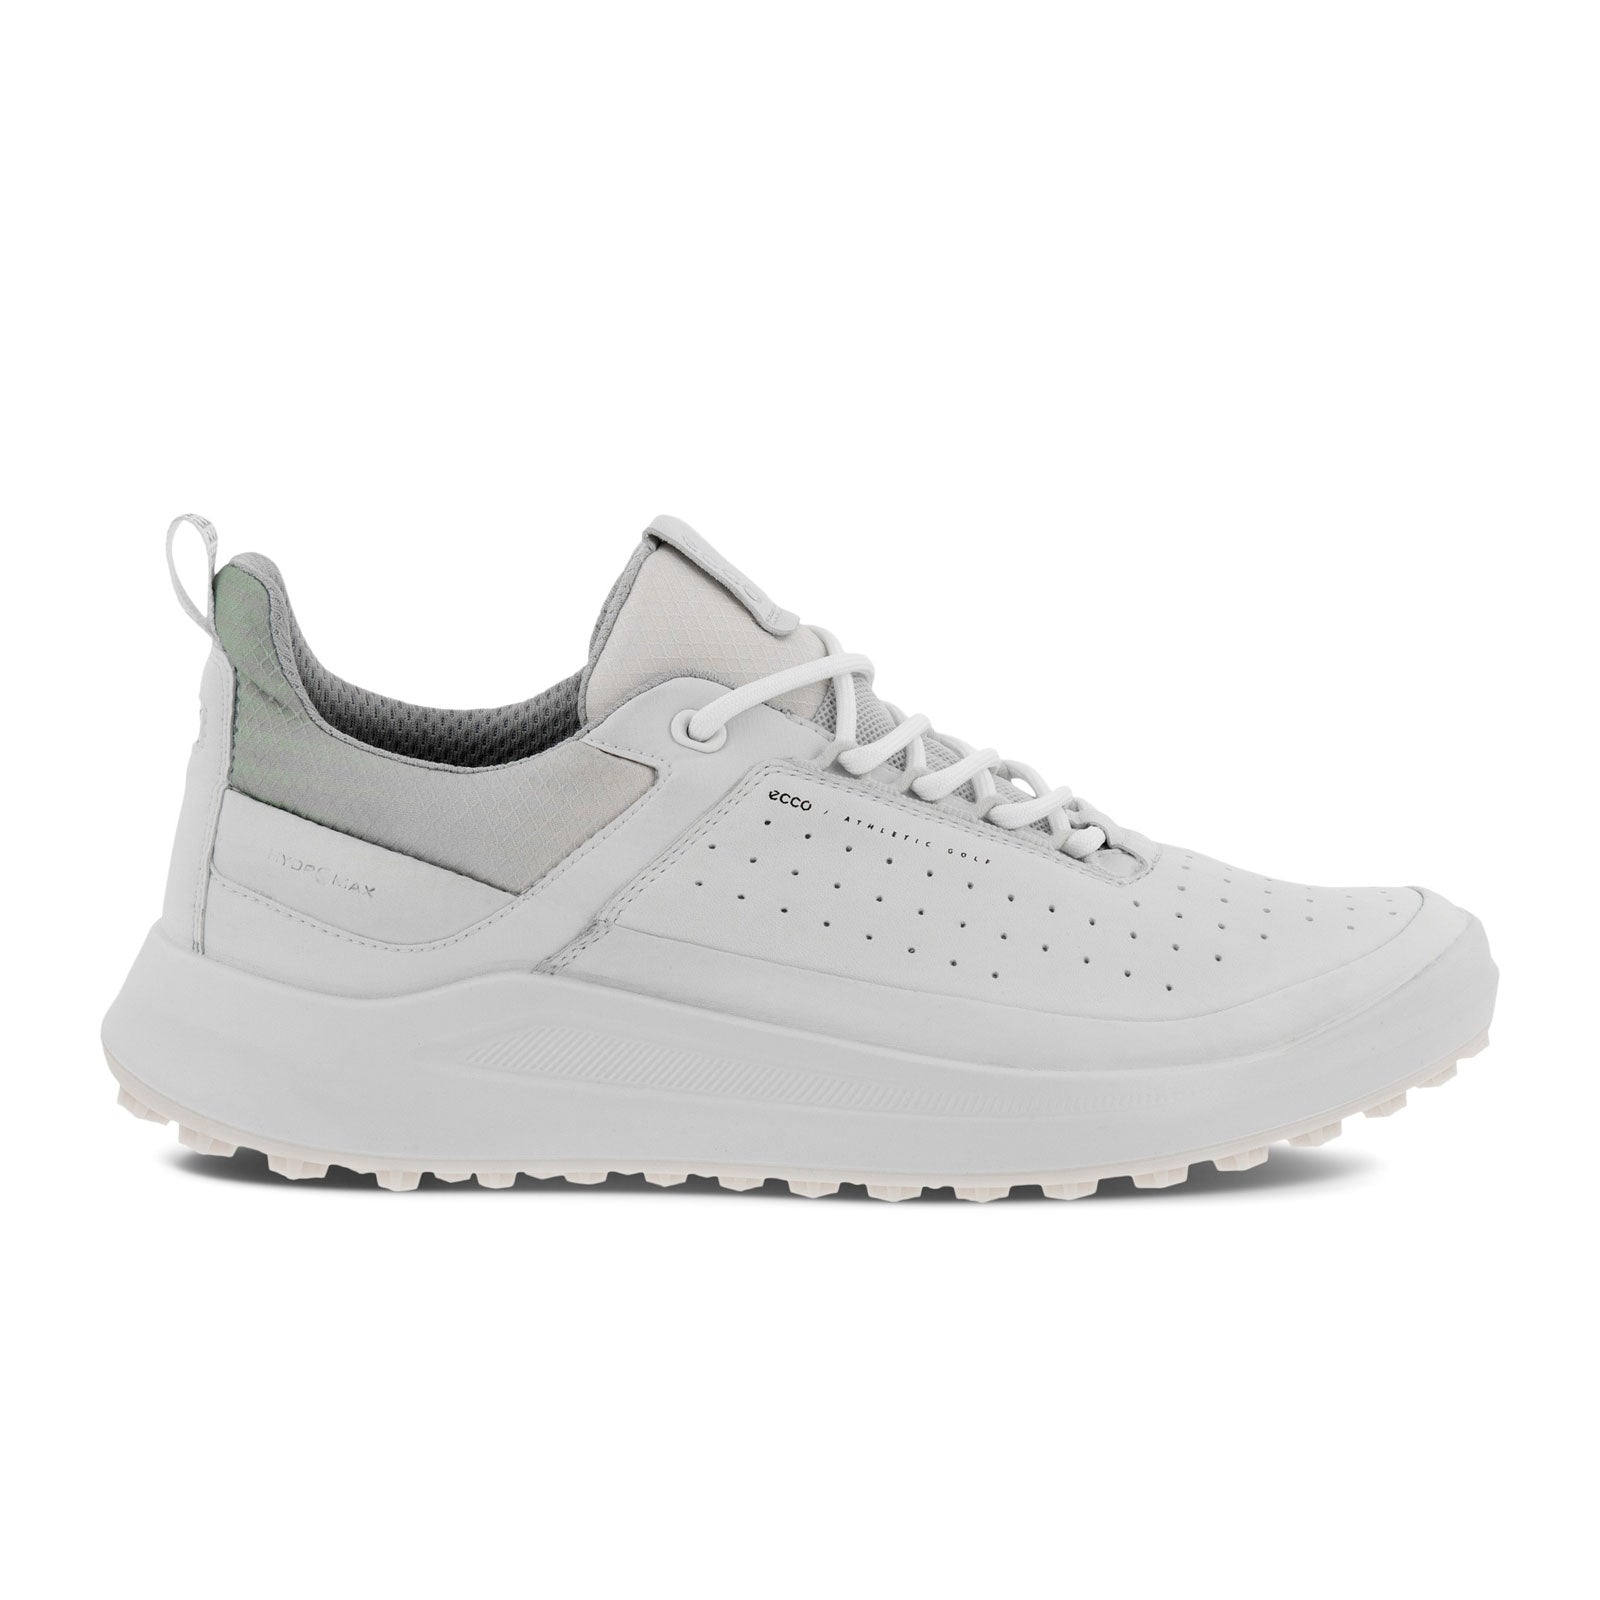 Core Golf Shoe (Women) - White/White/Ice Flower/Delicacy - The Shoe Fitters